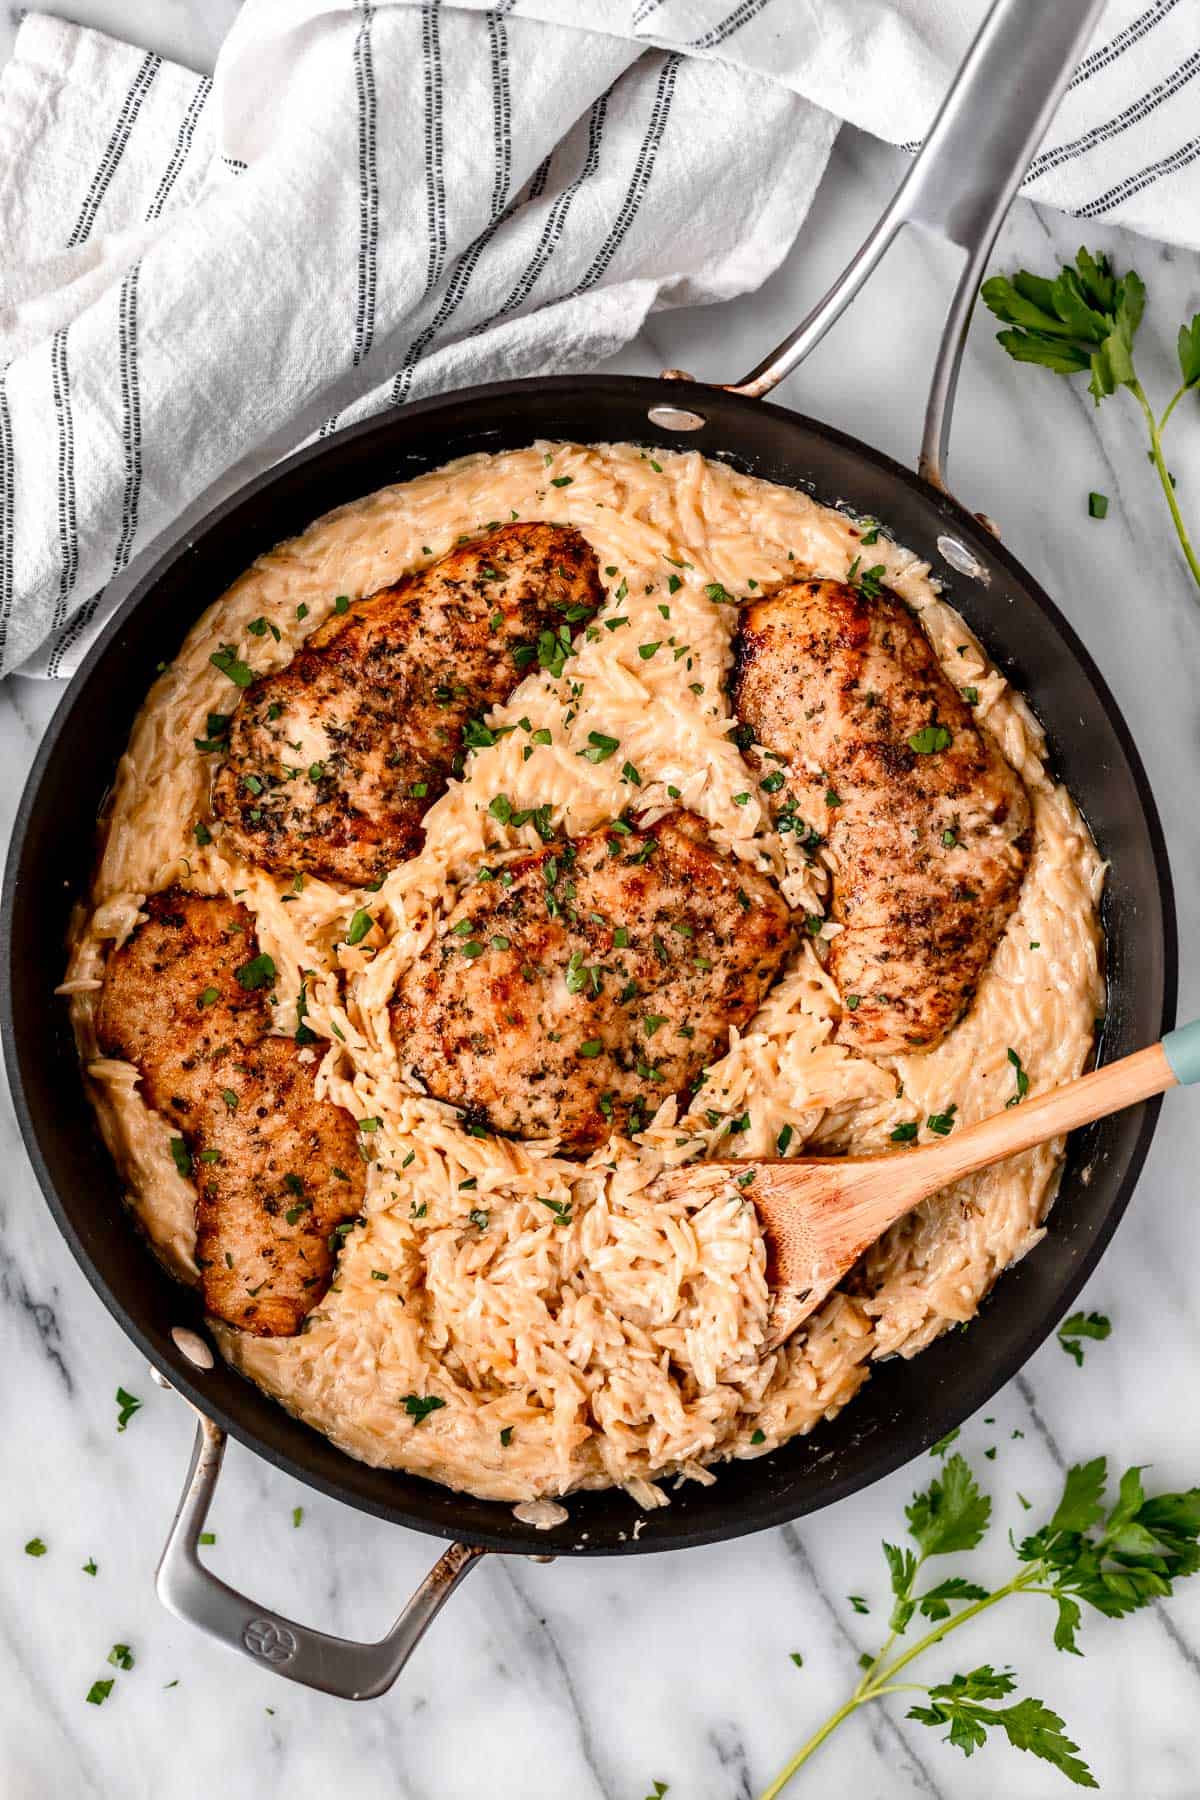 Parmesan Chicken Orzo in a skillet with a wood spoon lifting up some of the pasta.